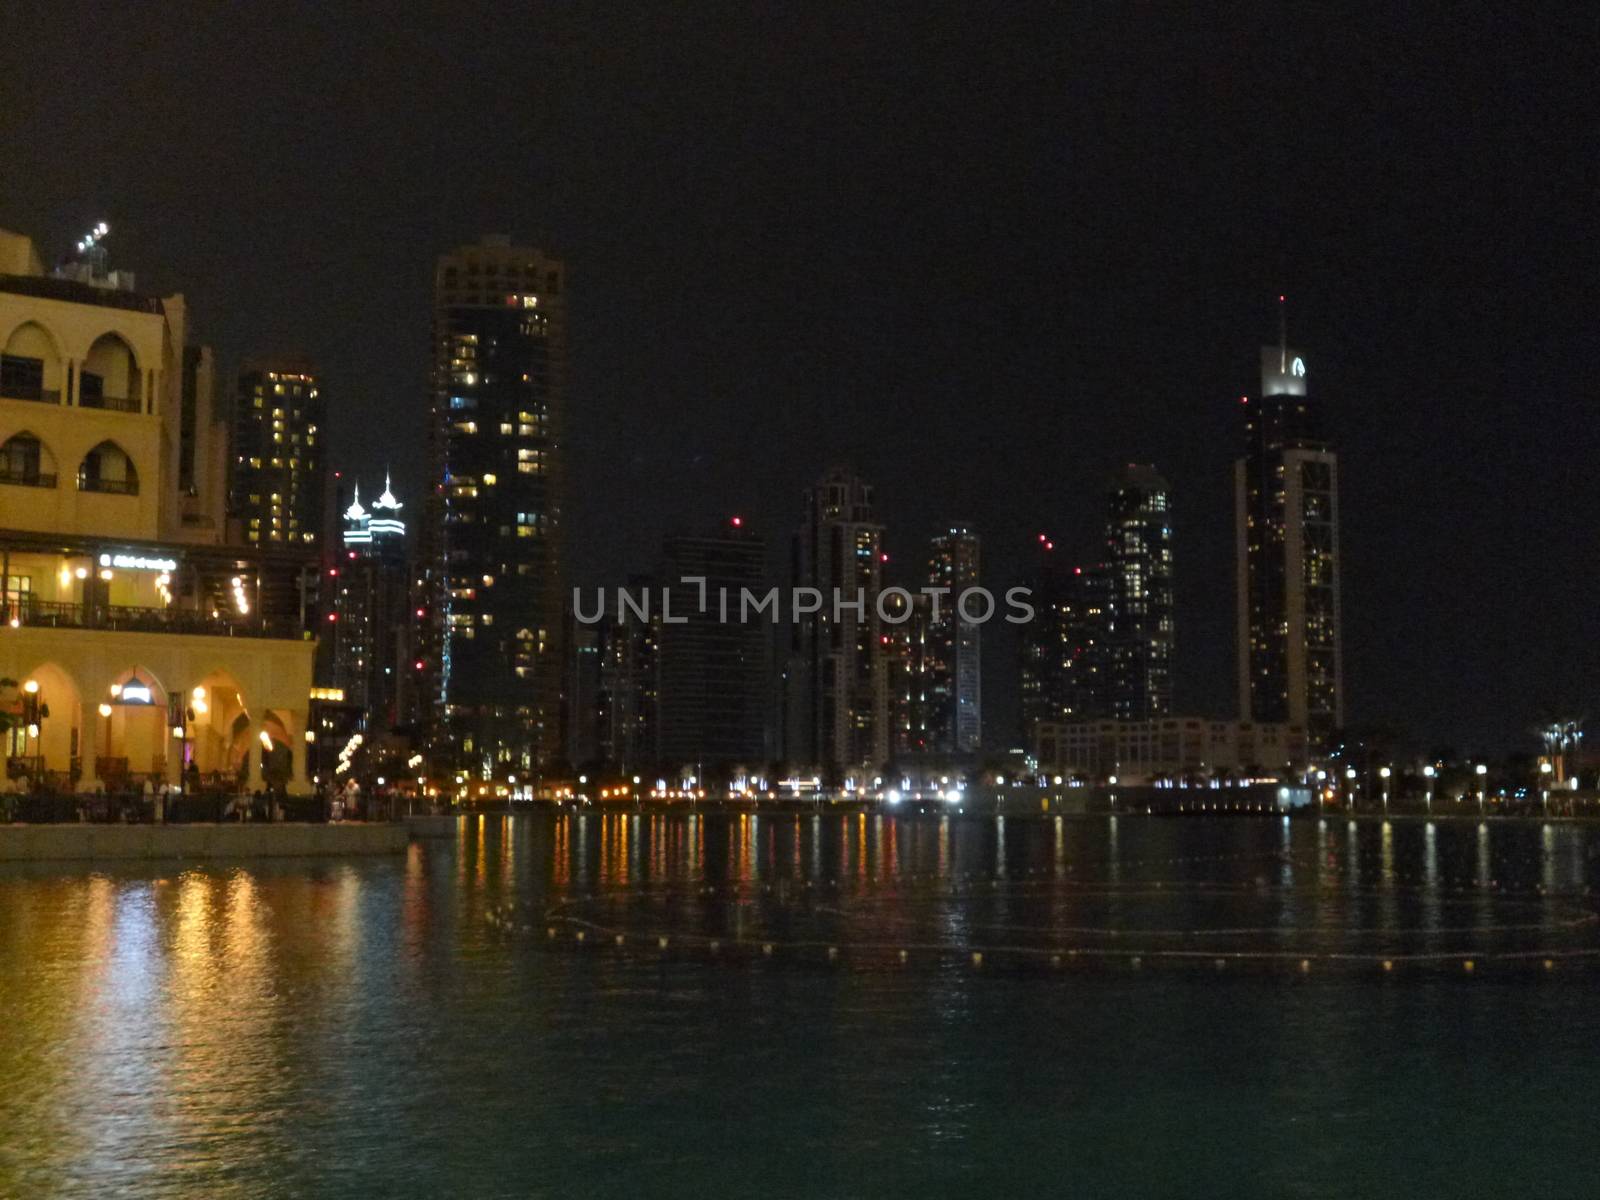 Dubai waterfront during the night by gswagh71